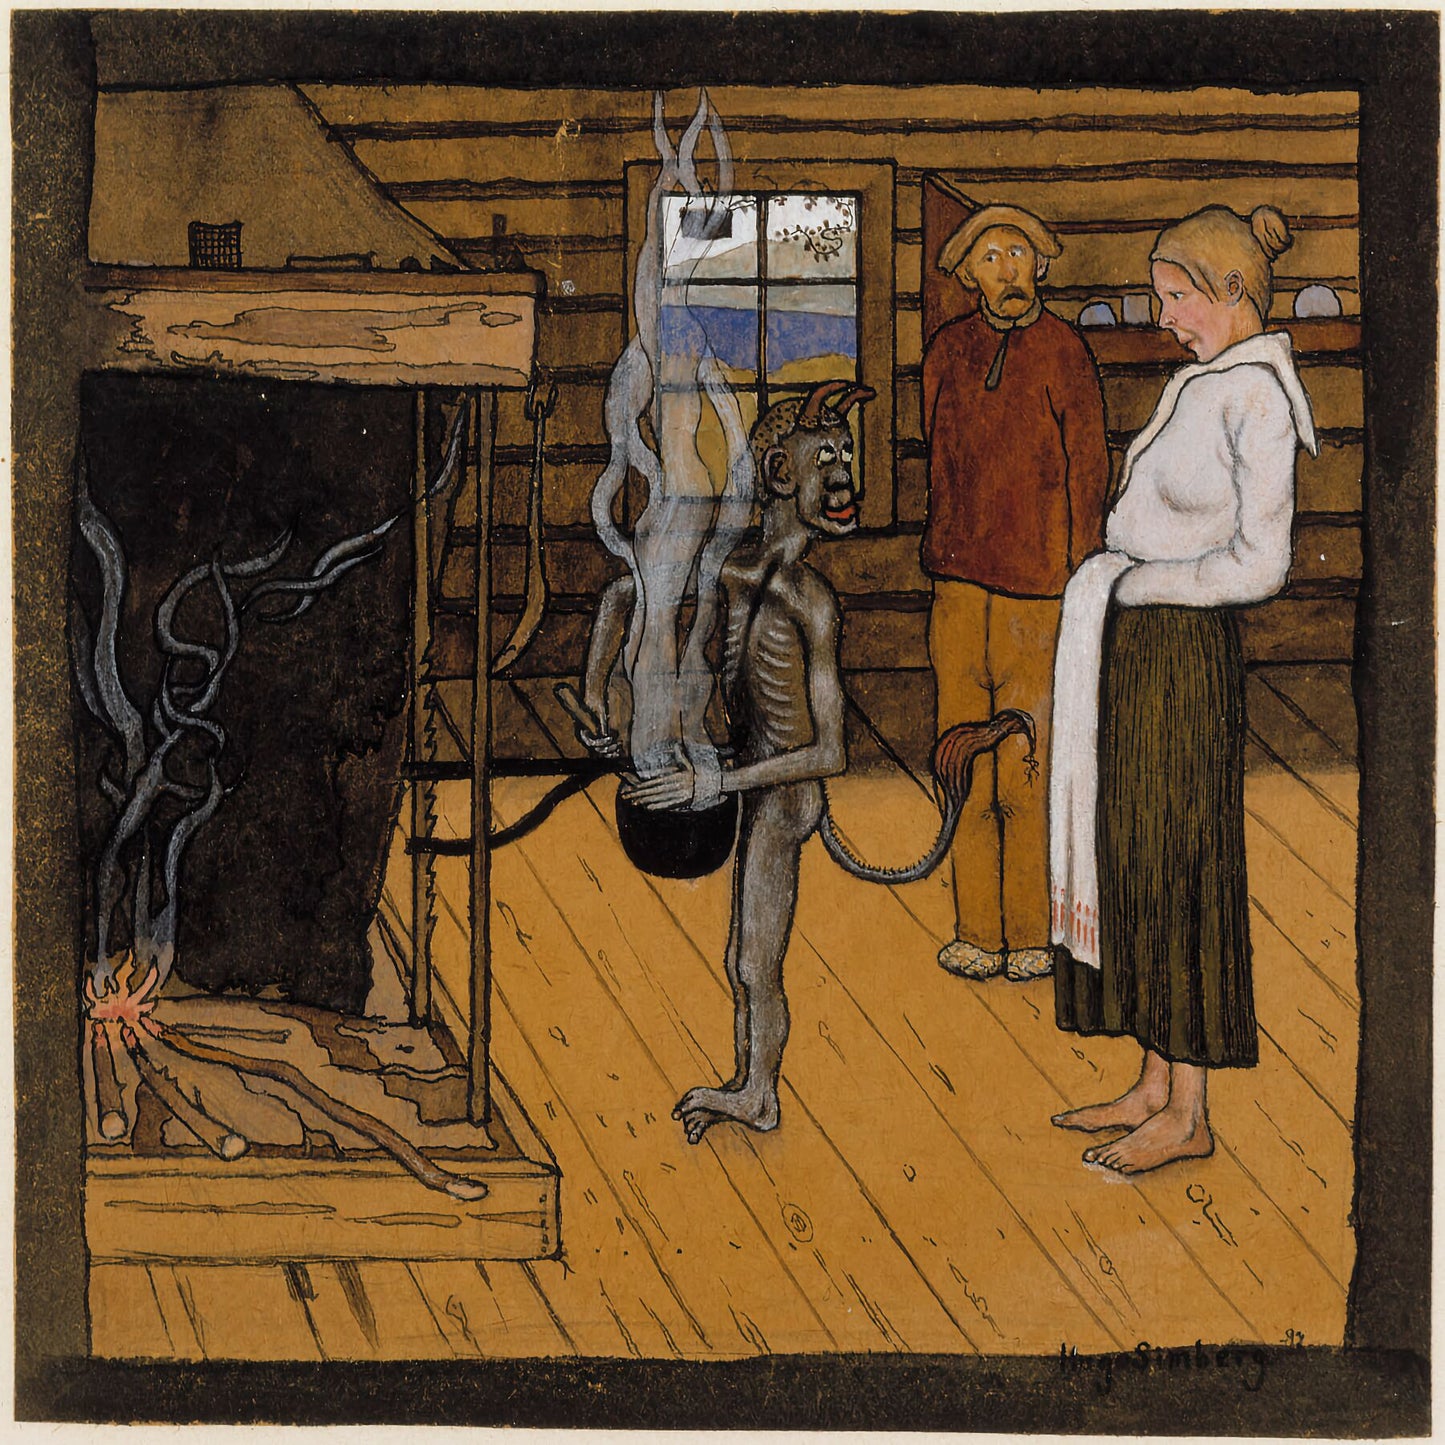 The Poor Devil by the Fire ; The Devil by the Pot by Hugo Simberg - 1897